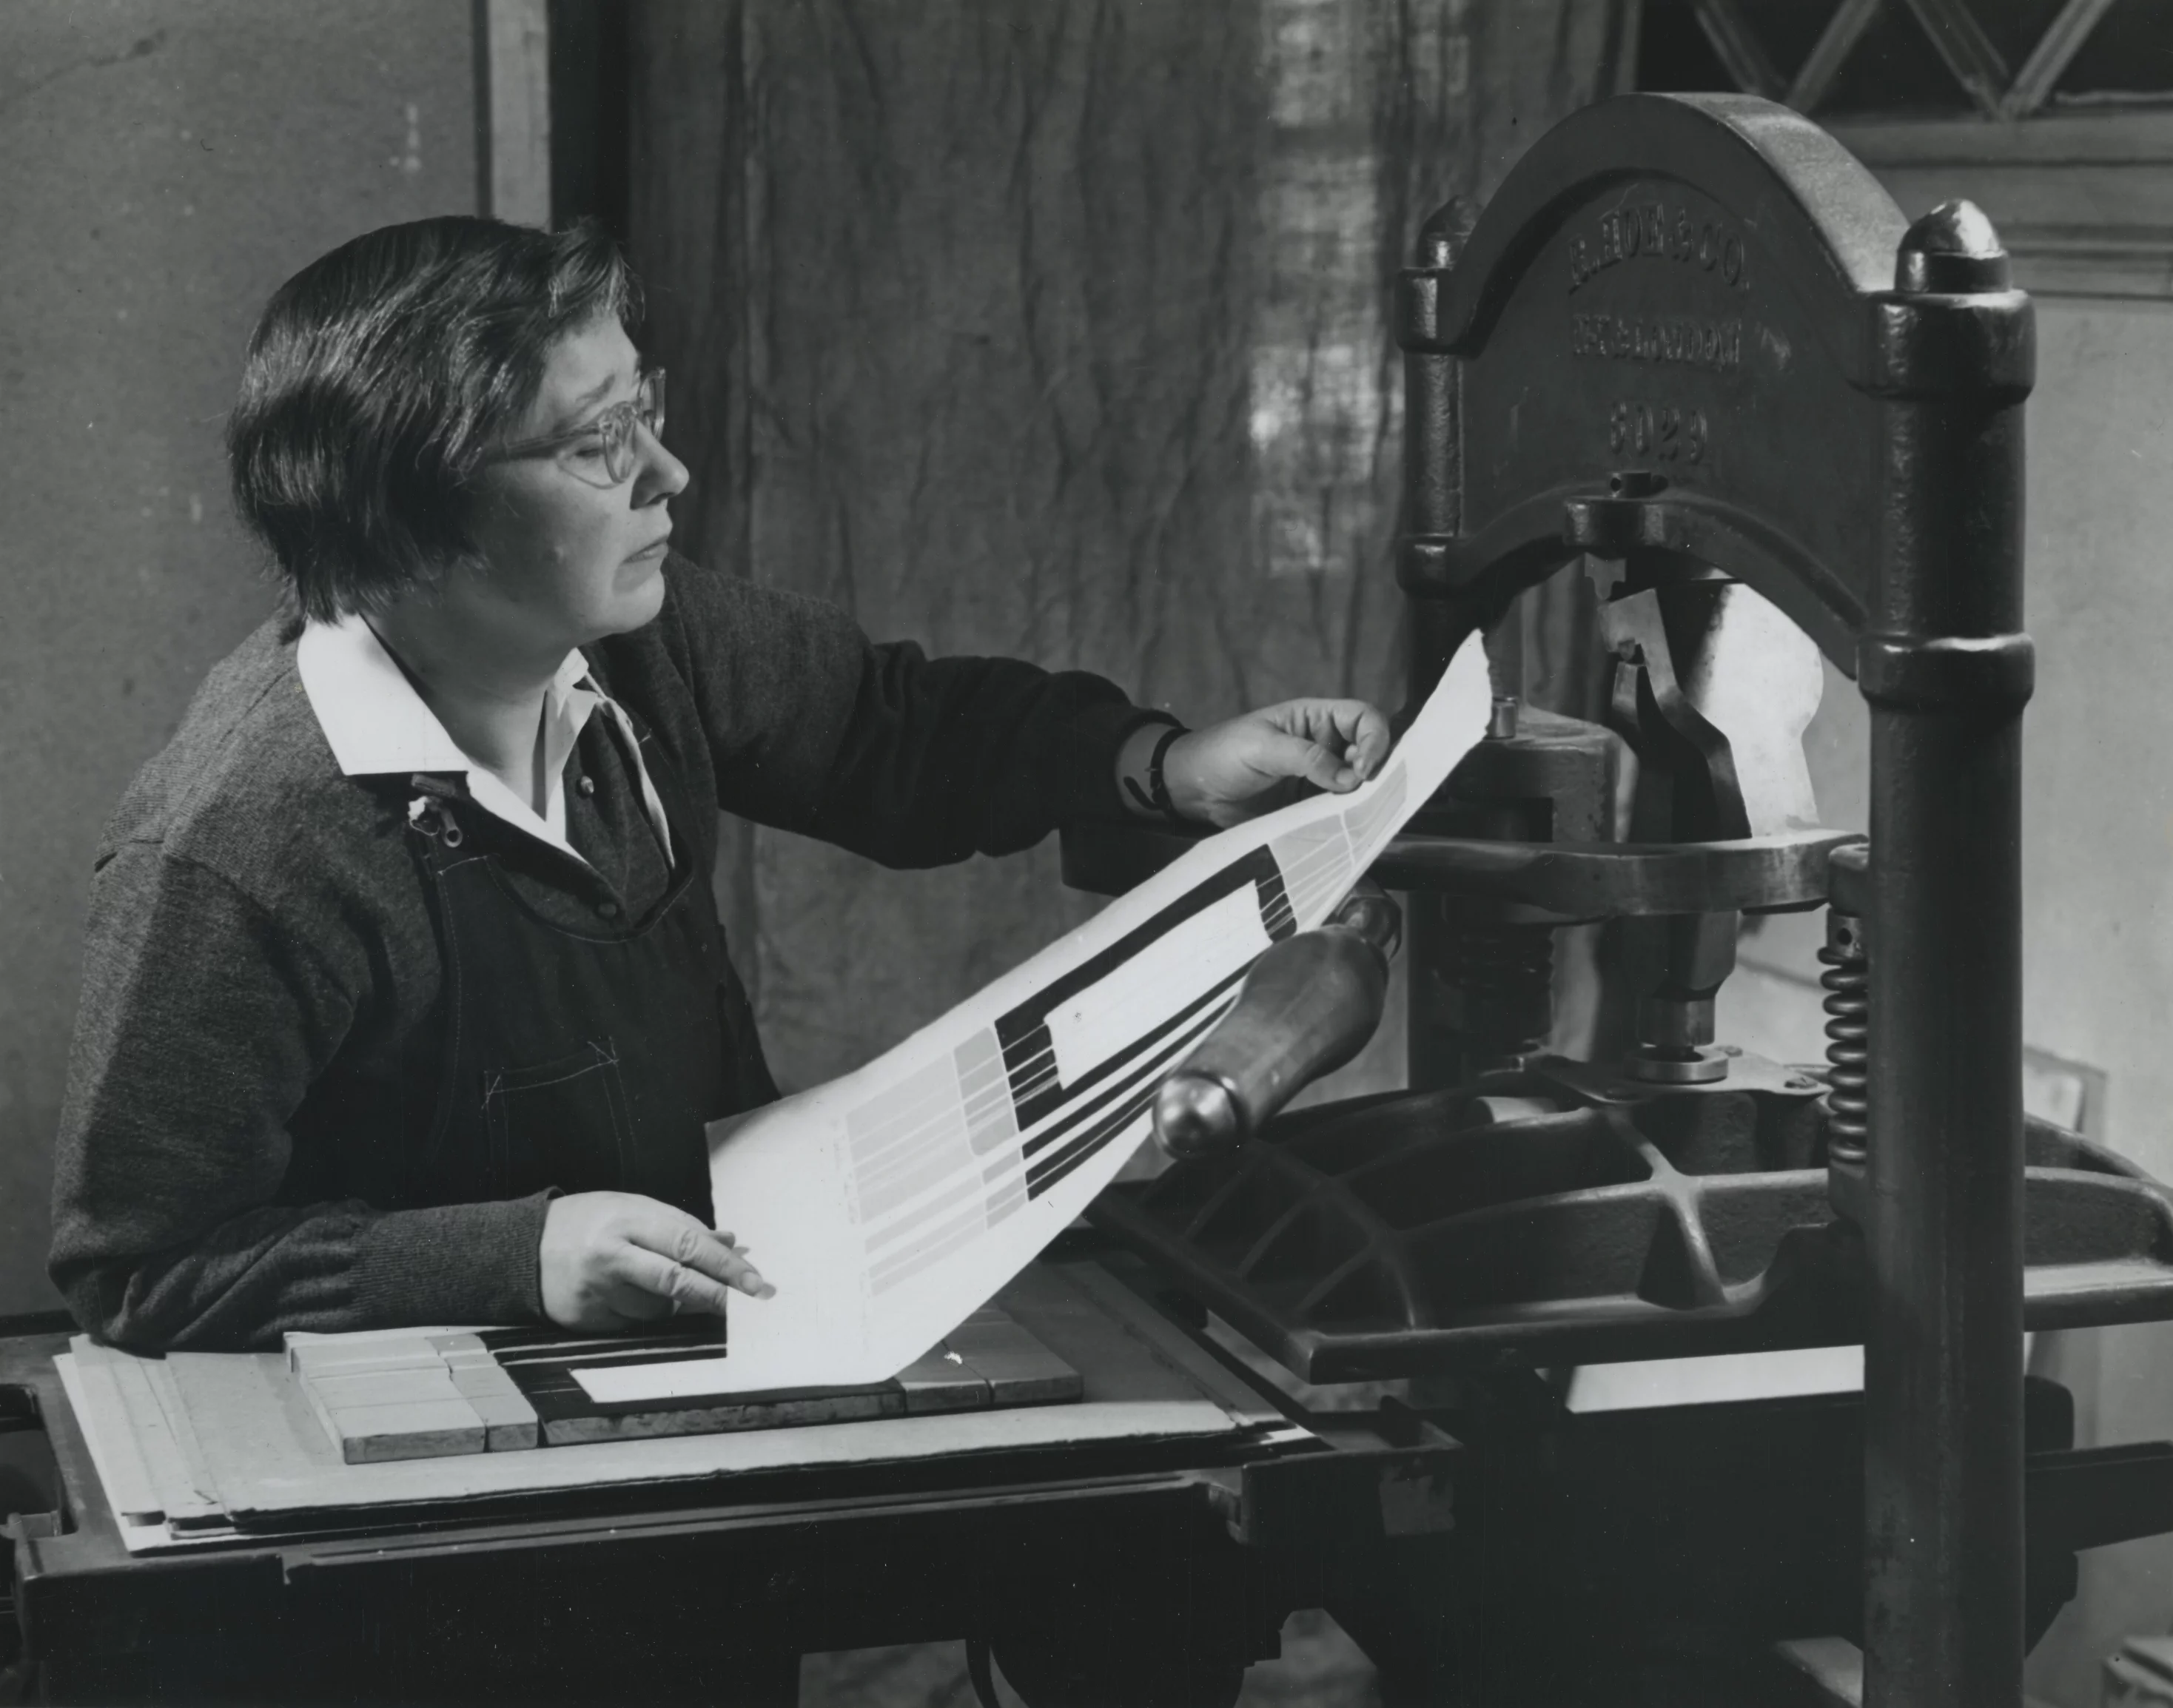 Black and white photograph from 1954 of a light-skinned, middle aged women, examining a print just pulled off of a large printmaking press.